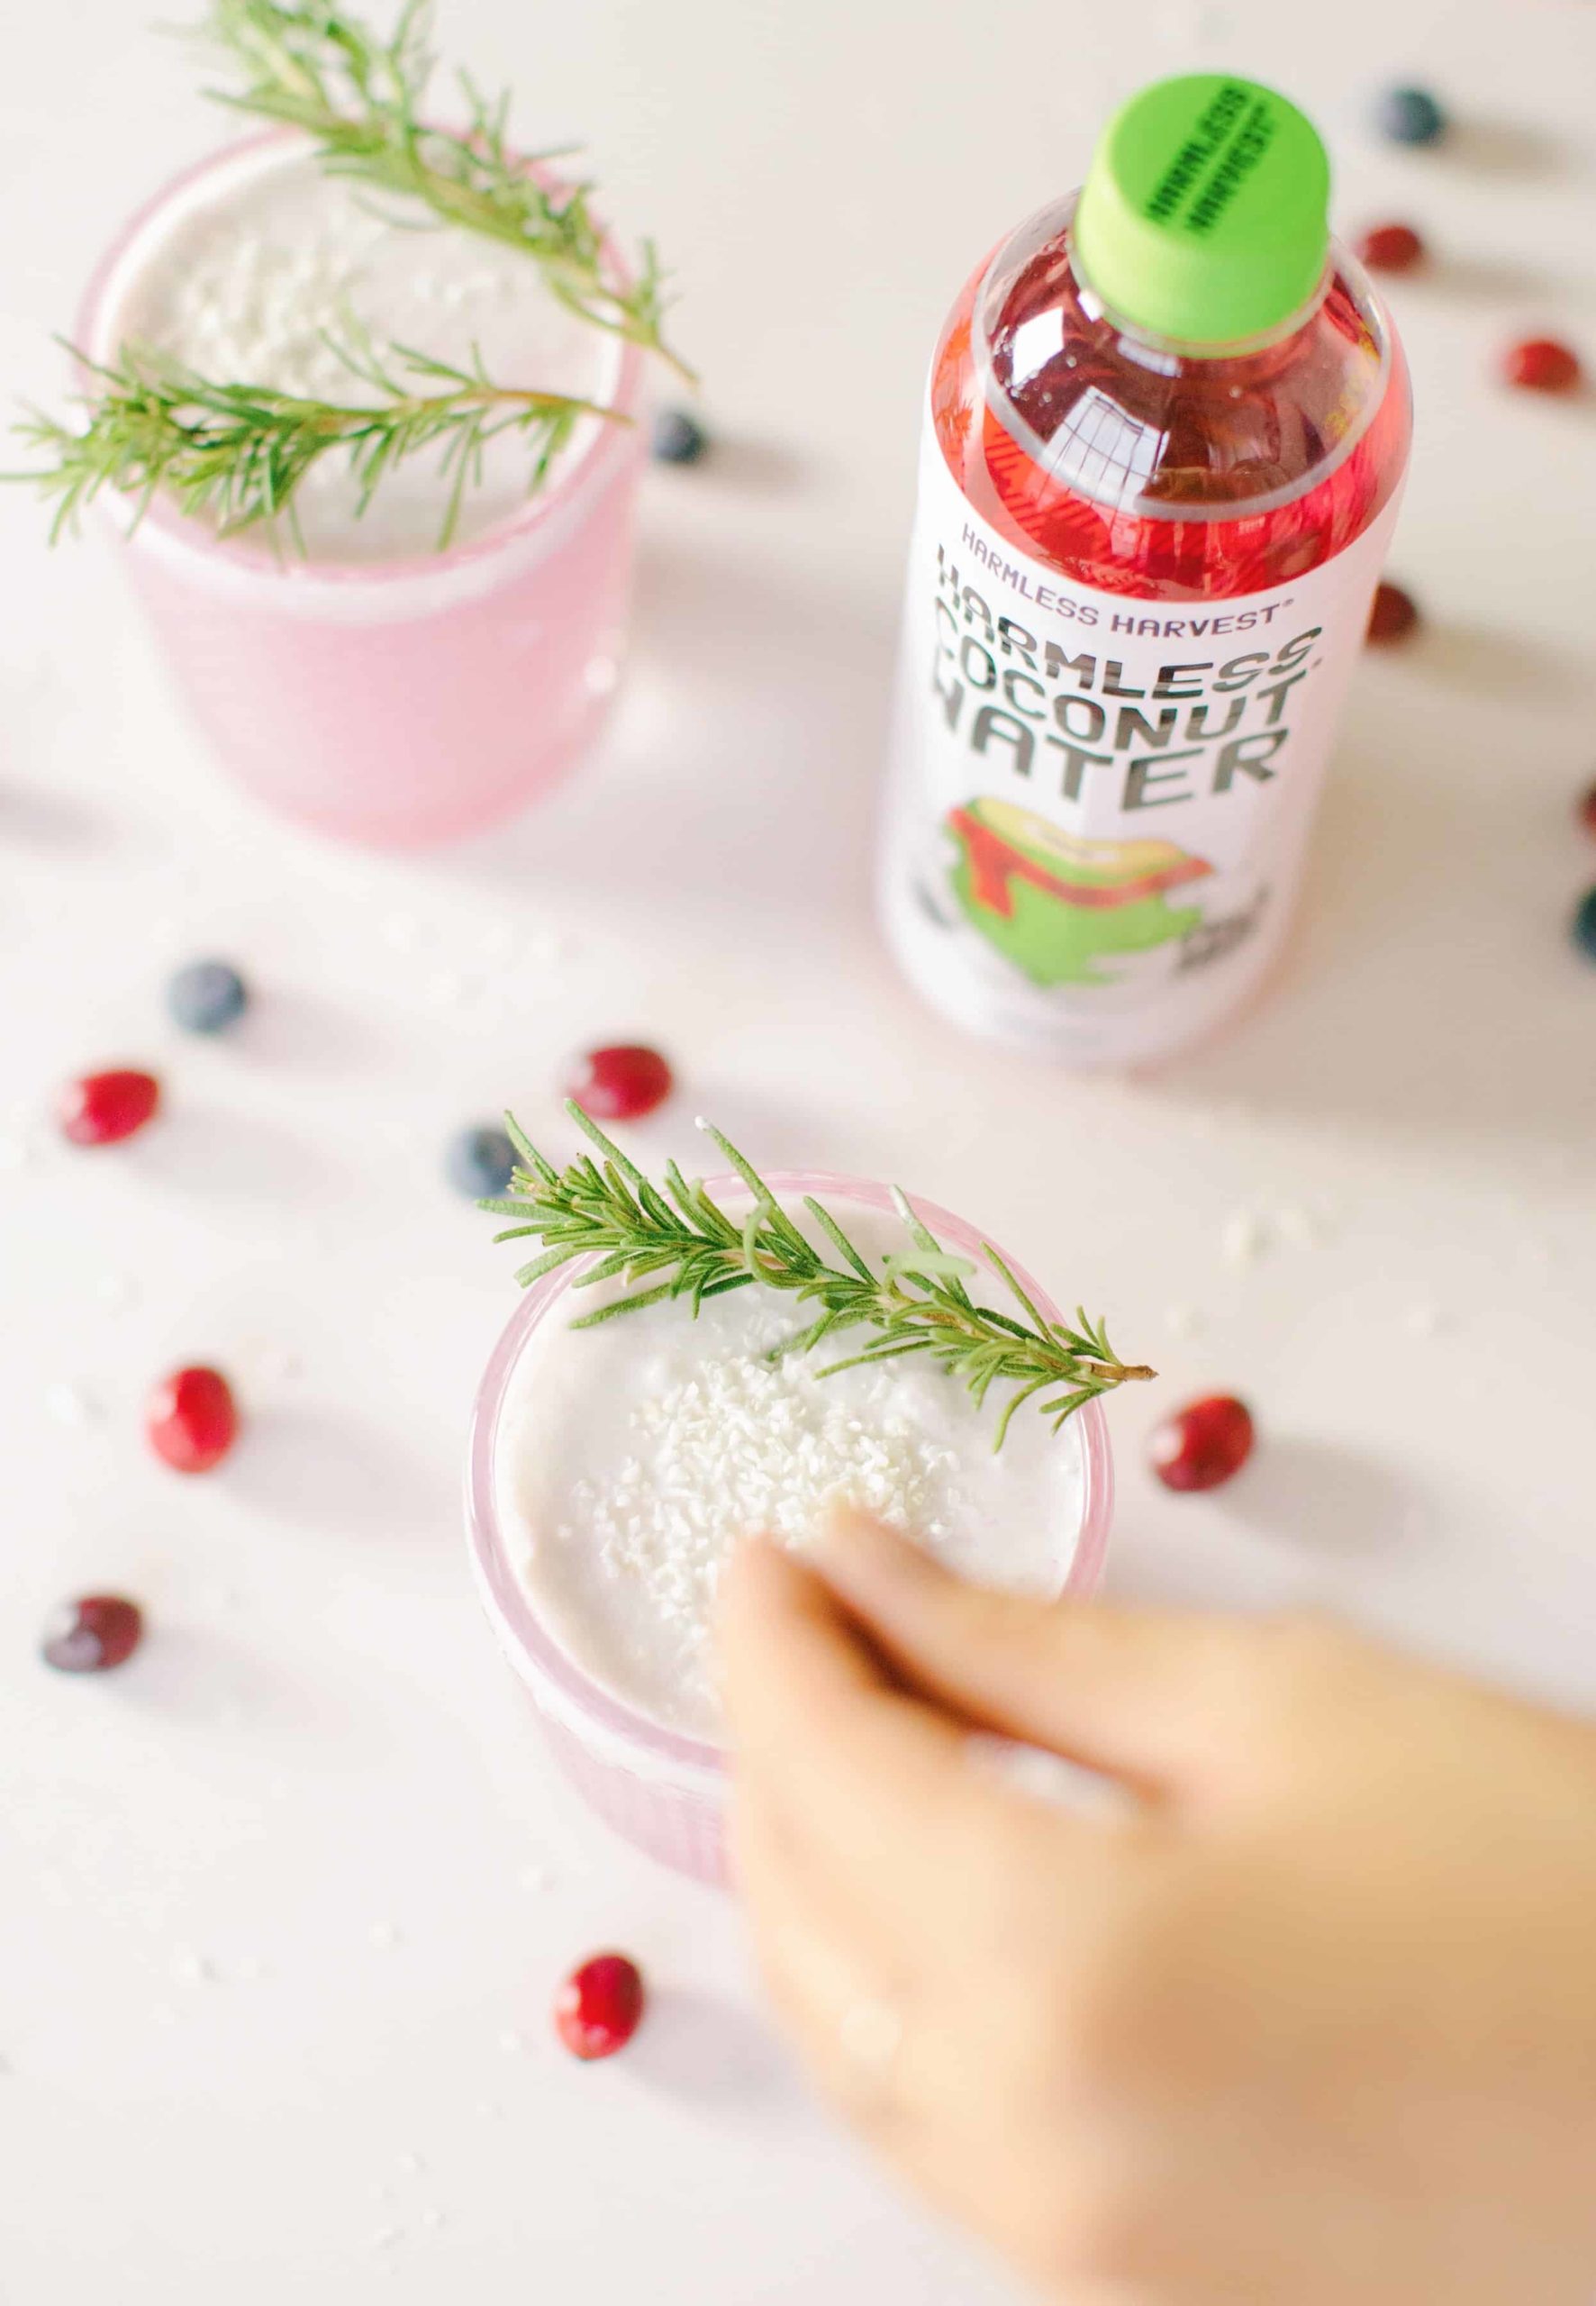 Festive Coconut Water Drink | If you are looking for a cute pink drink, this is it! Here is a recipe for a coconut water based non-alcoholic drink. No hangover but still 100% fun! | The Dimple Life #thedimplelife #pinkdrink #vegan #glutenfree